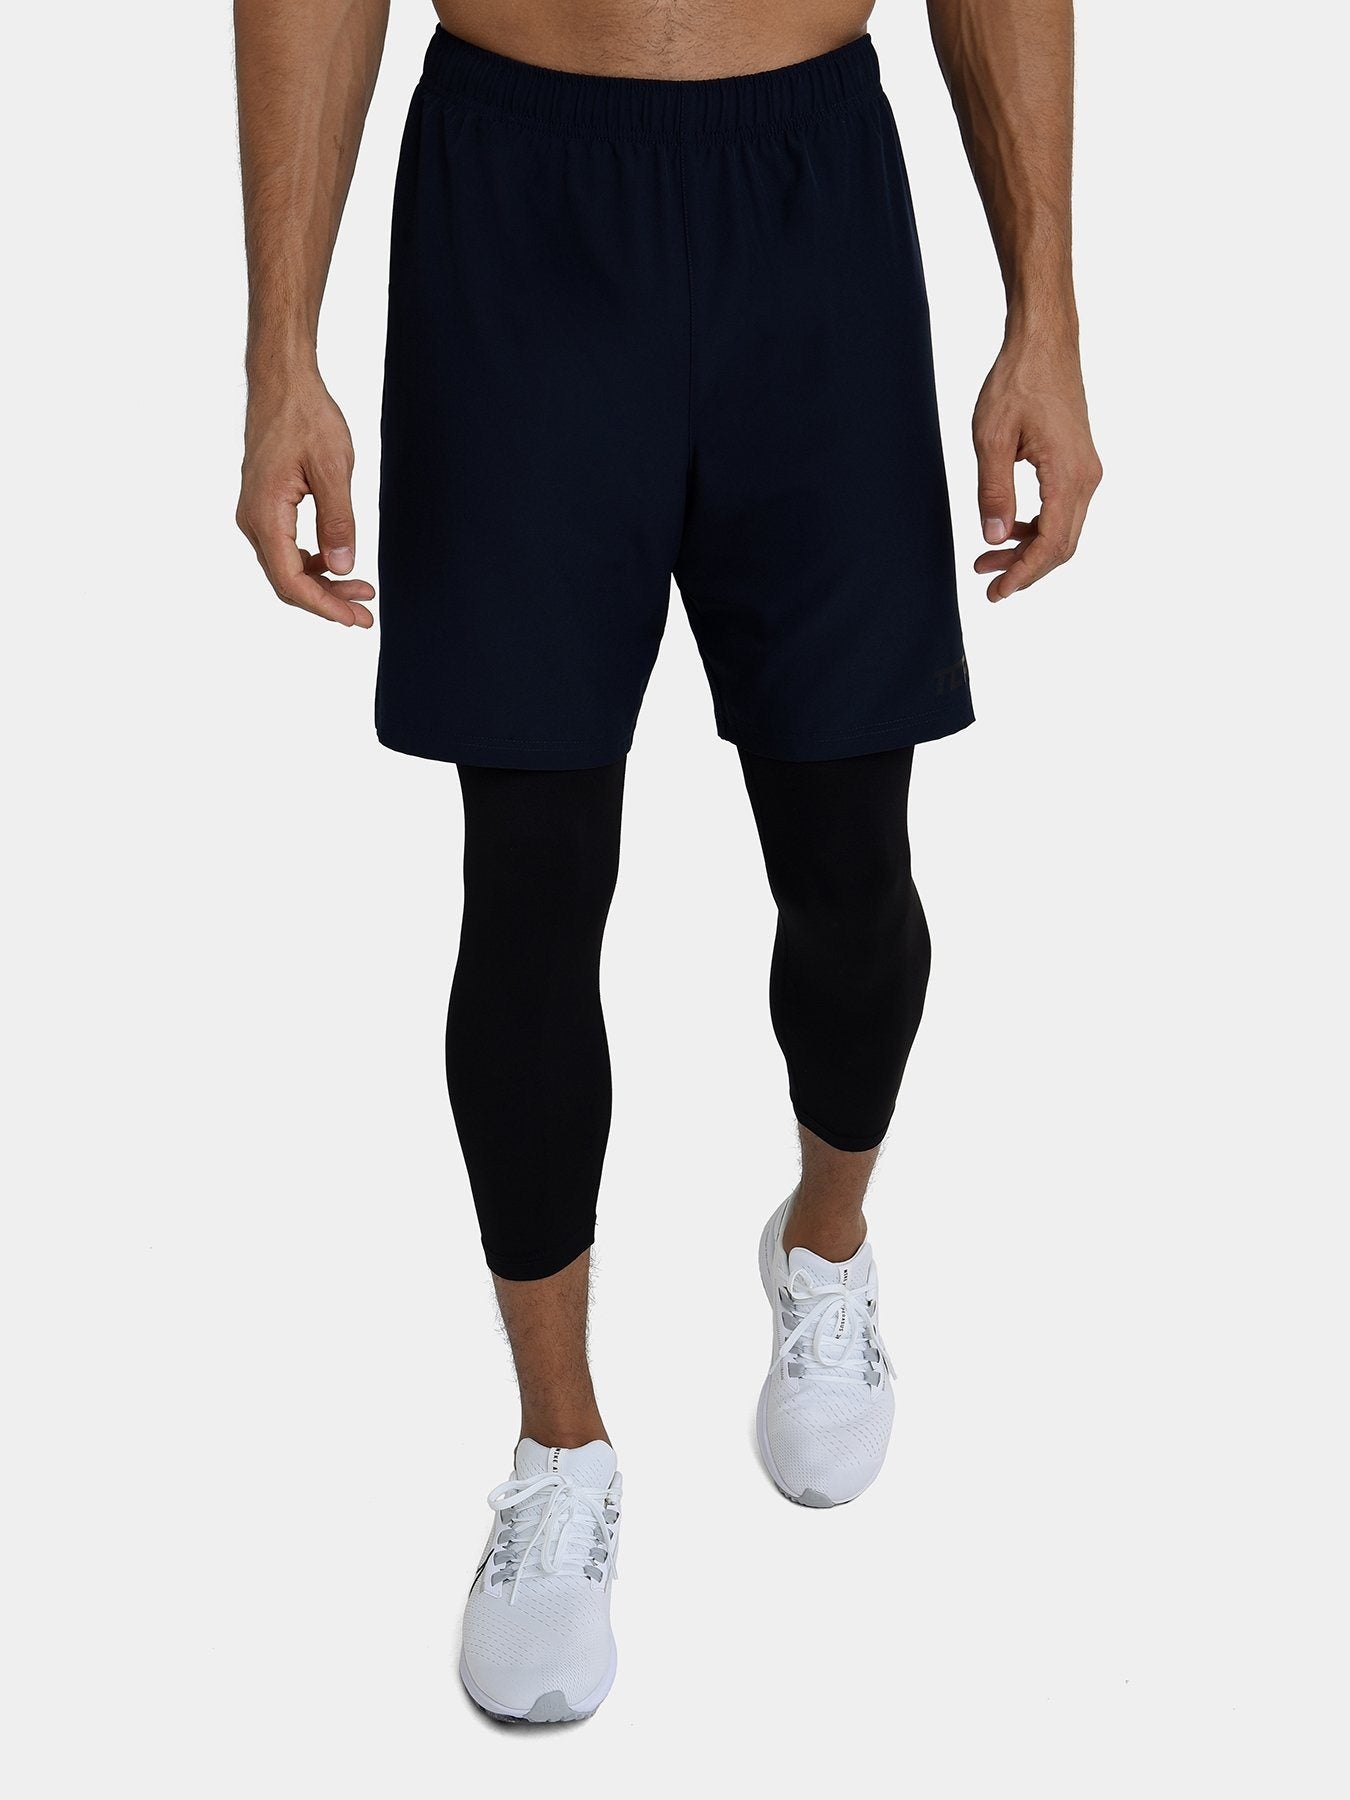  Men's Compression Pants with Shorts 2 in 1 Running